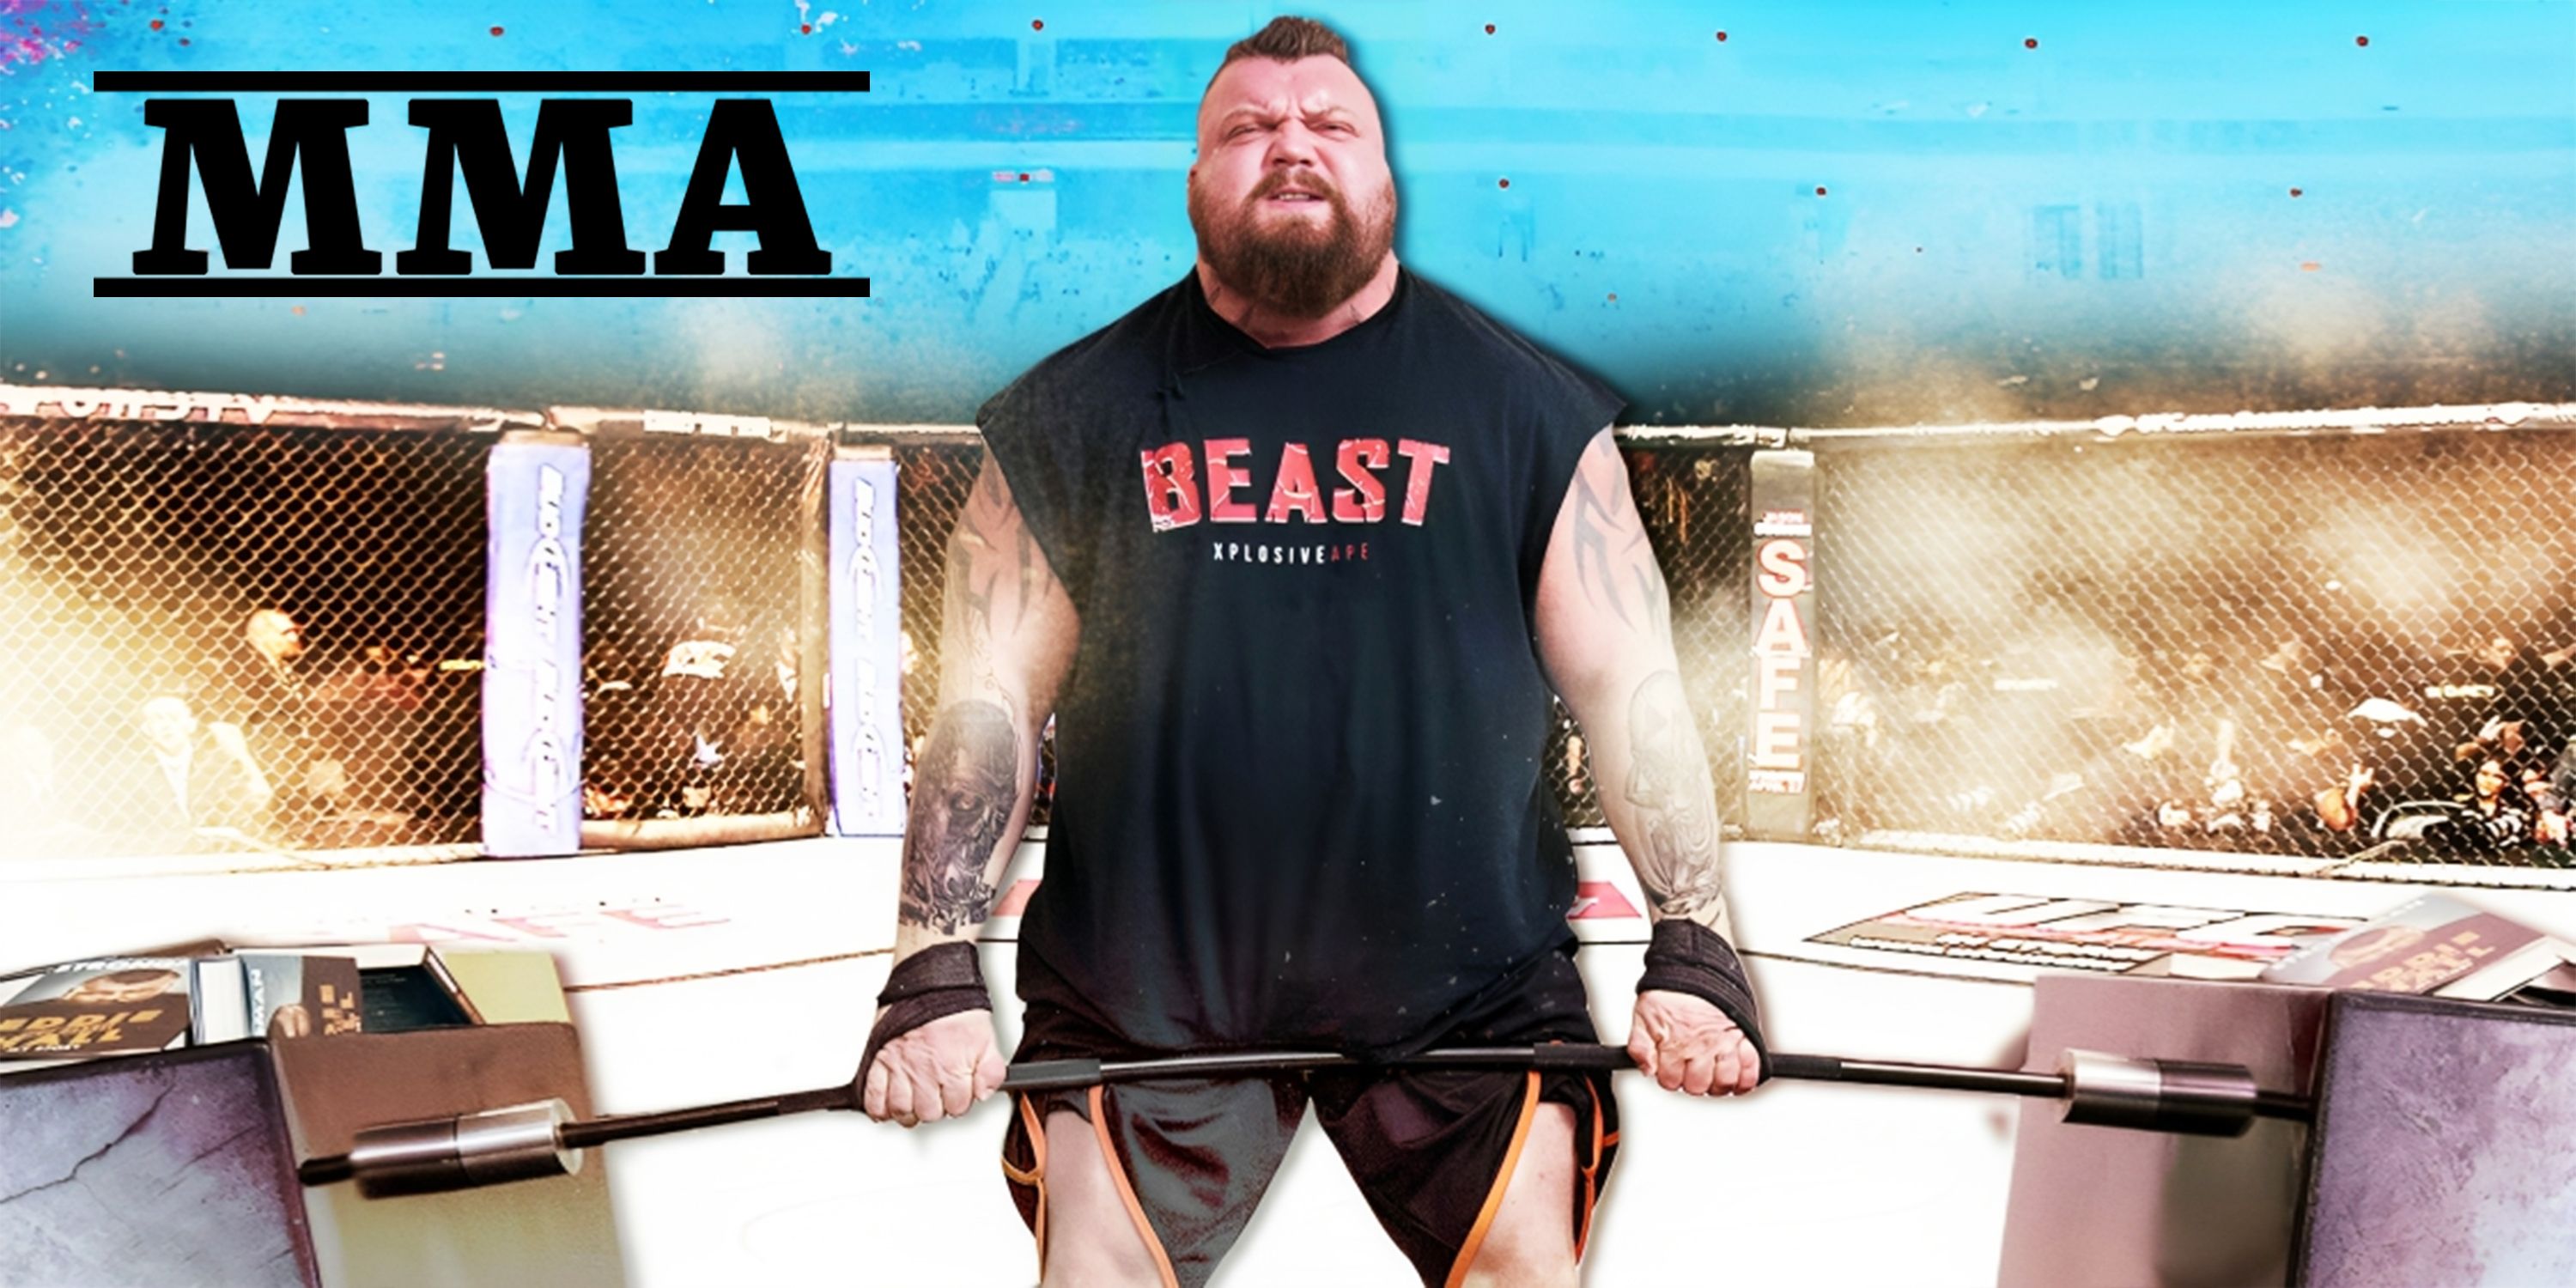 Eddie Hall is going into MMA 